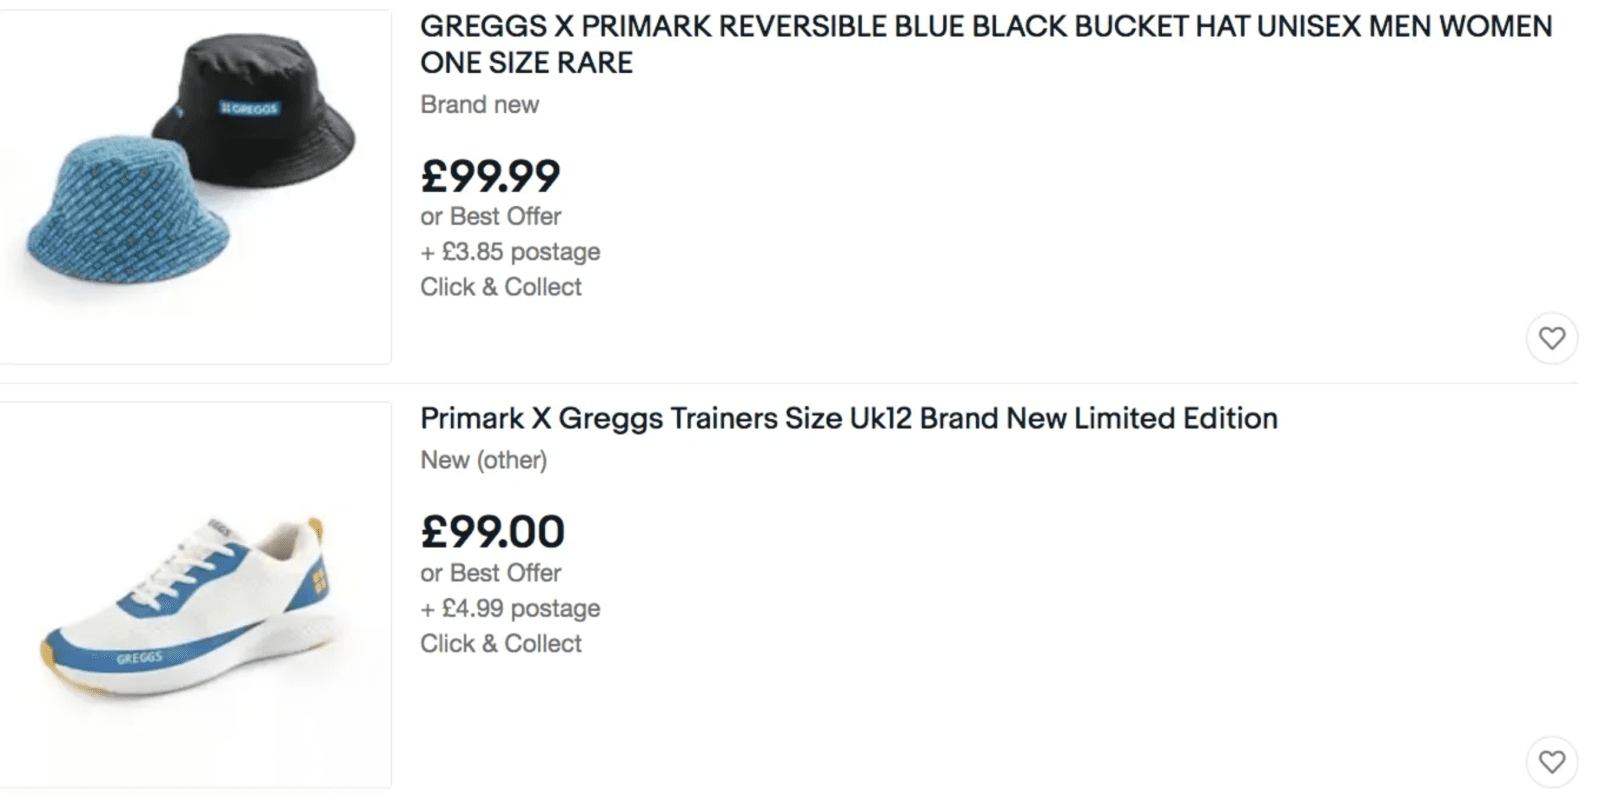 Greggs x Primark range products found on eBay for three times as much, The Manc